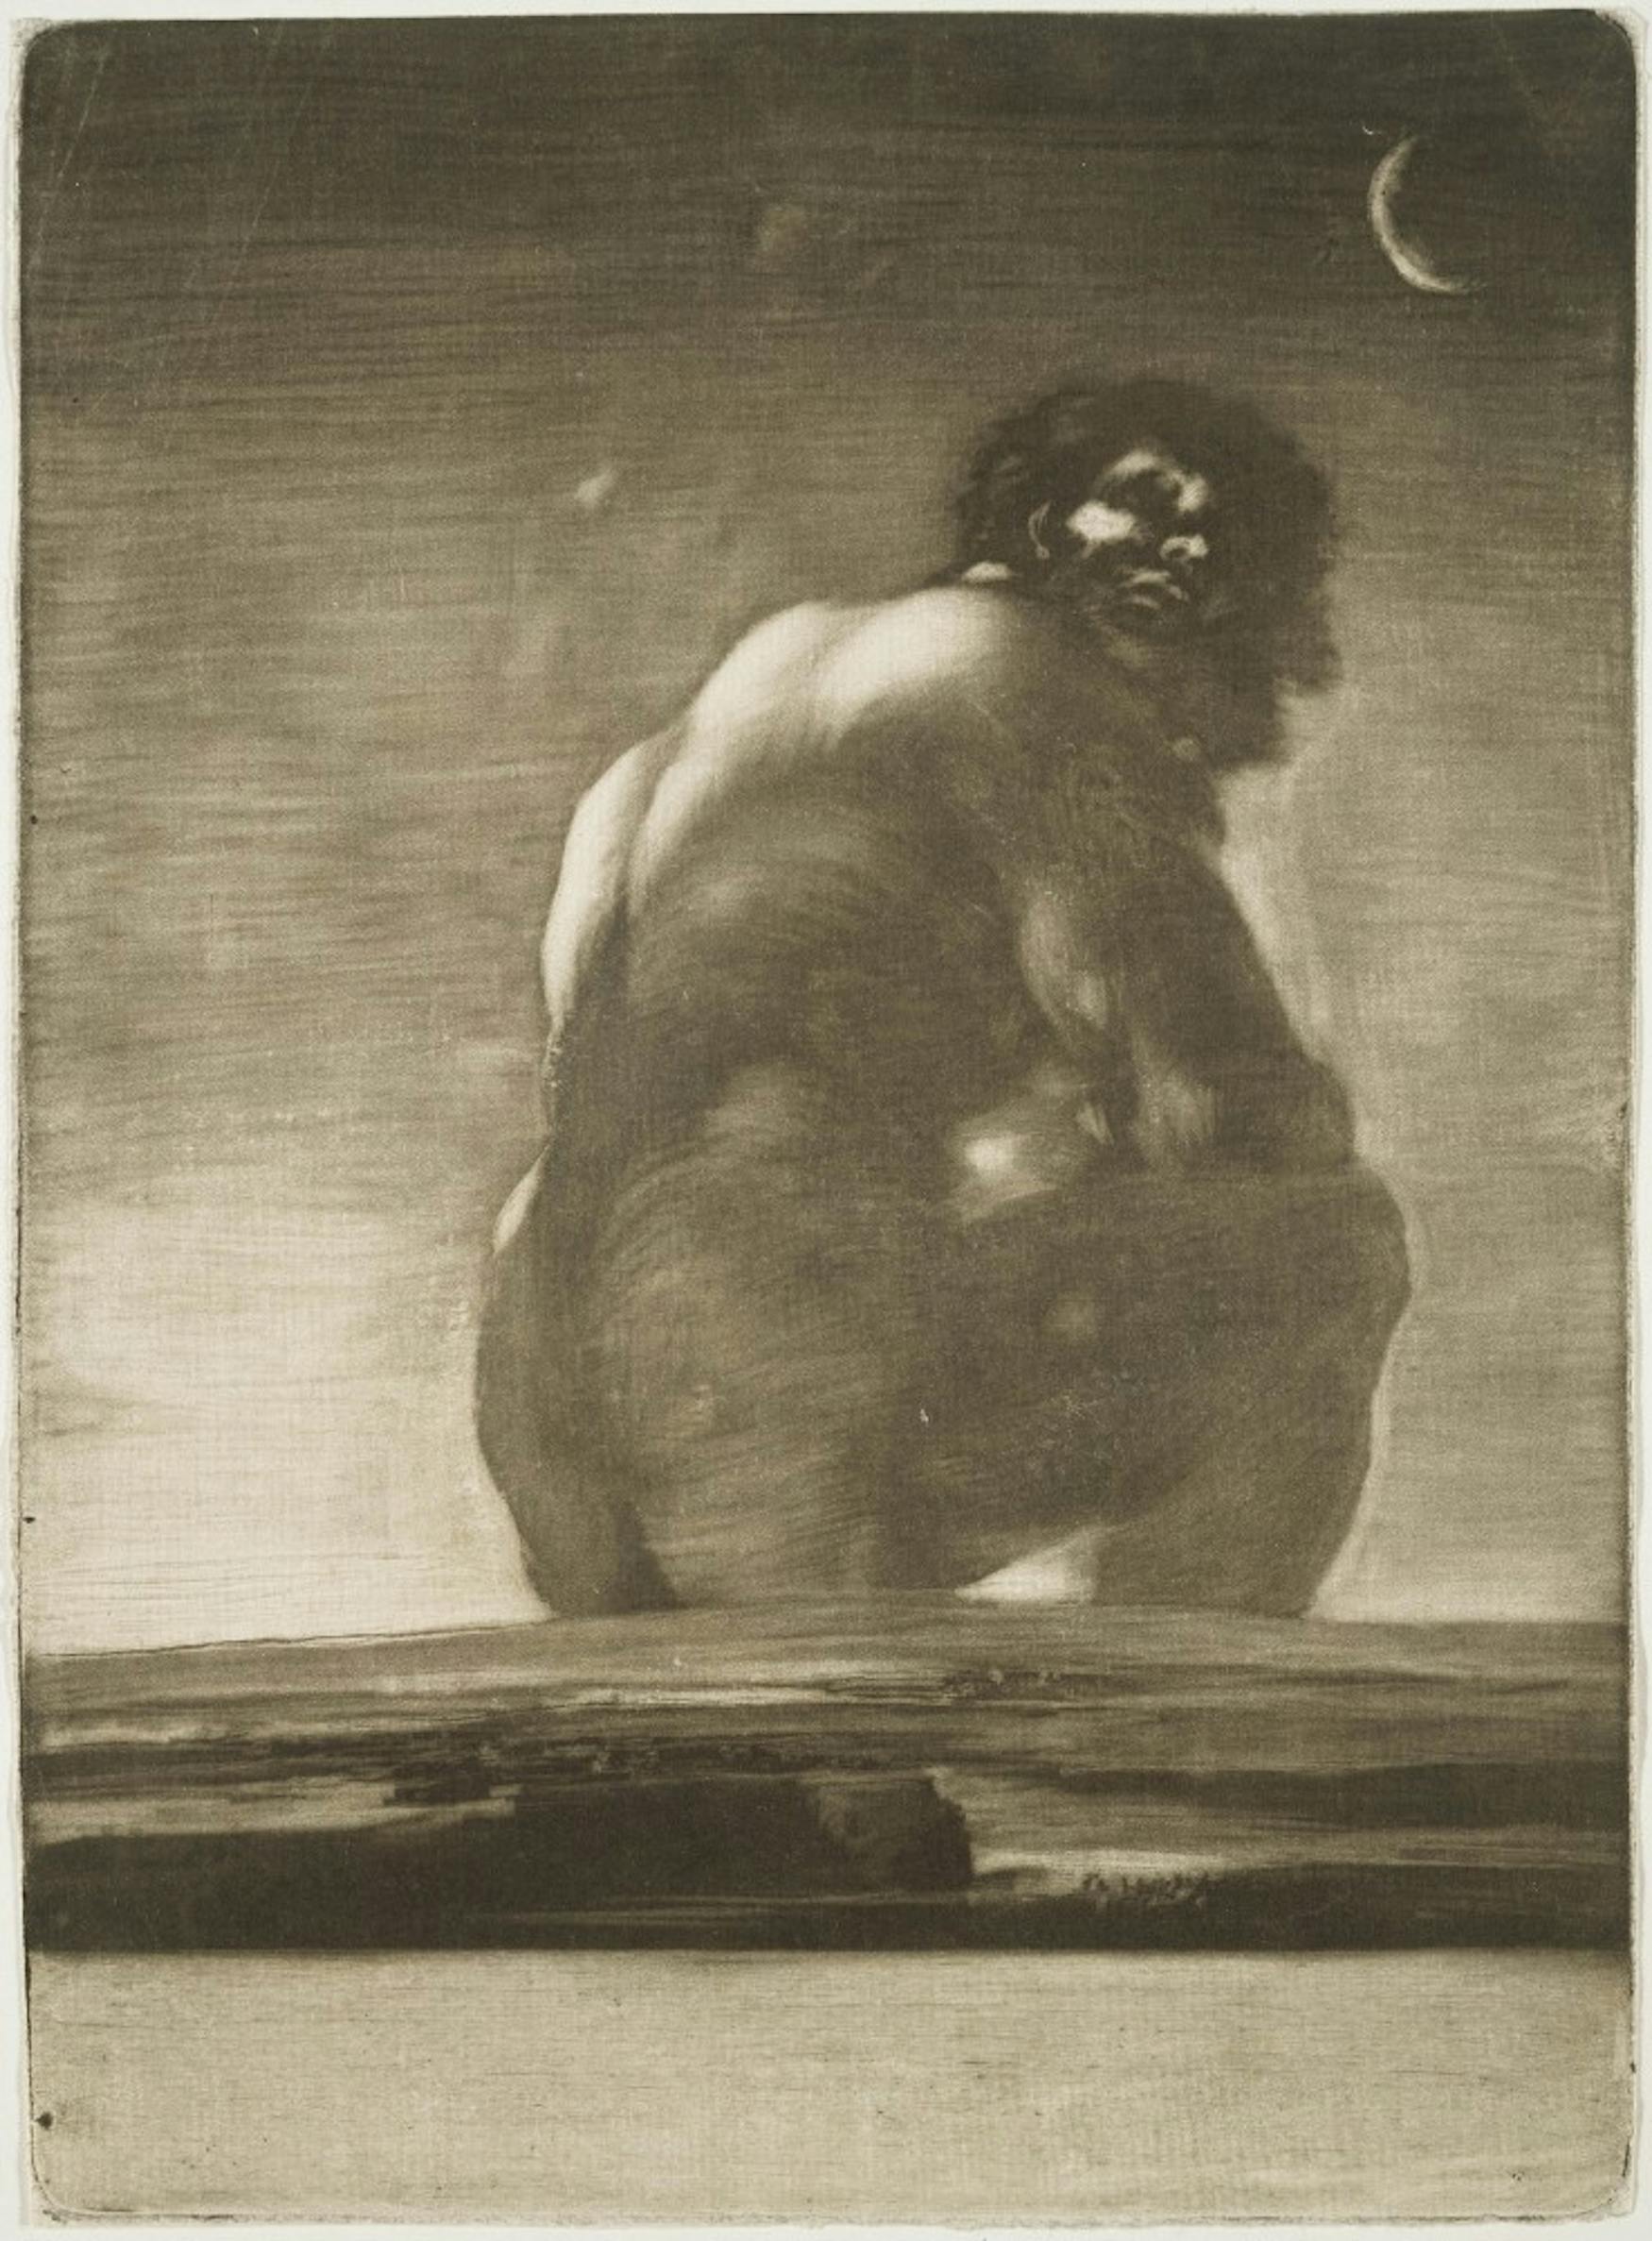 2.
Seated Giant
Francisco Goya y Lucientes (Spanish, 1746–1828)
by 1818
Burnished aquatint; working proof, first state
* Katherine E. Bullard Fund in memory of Francis Bullard
* Photograph © Museum of Fine Arts, Boston